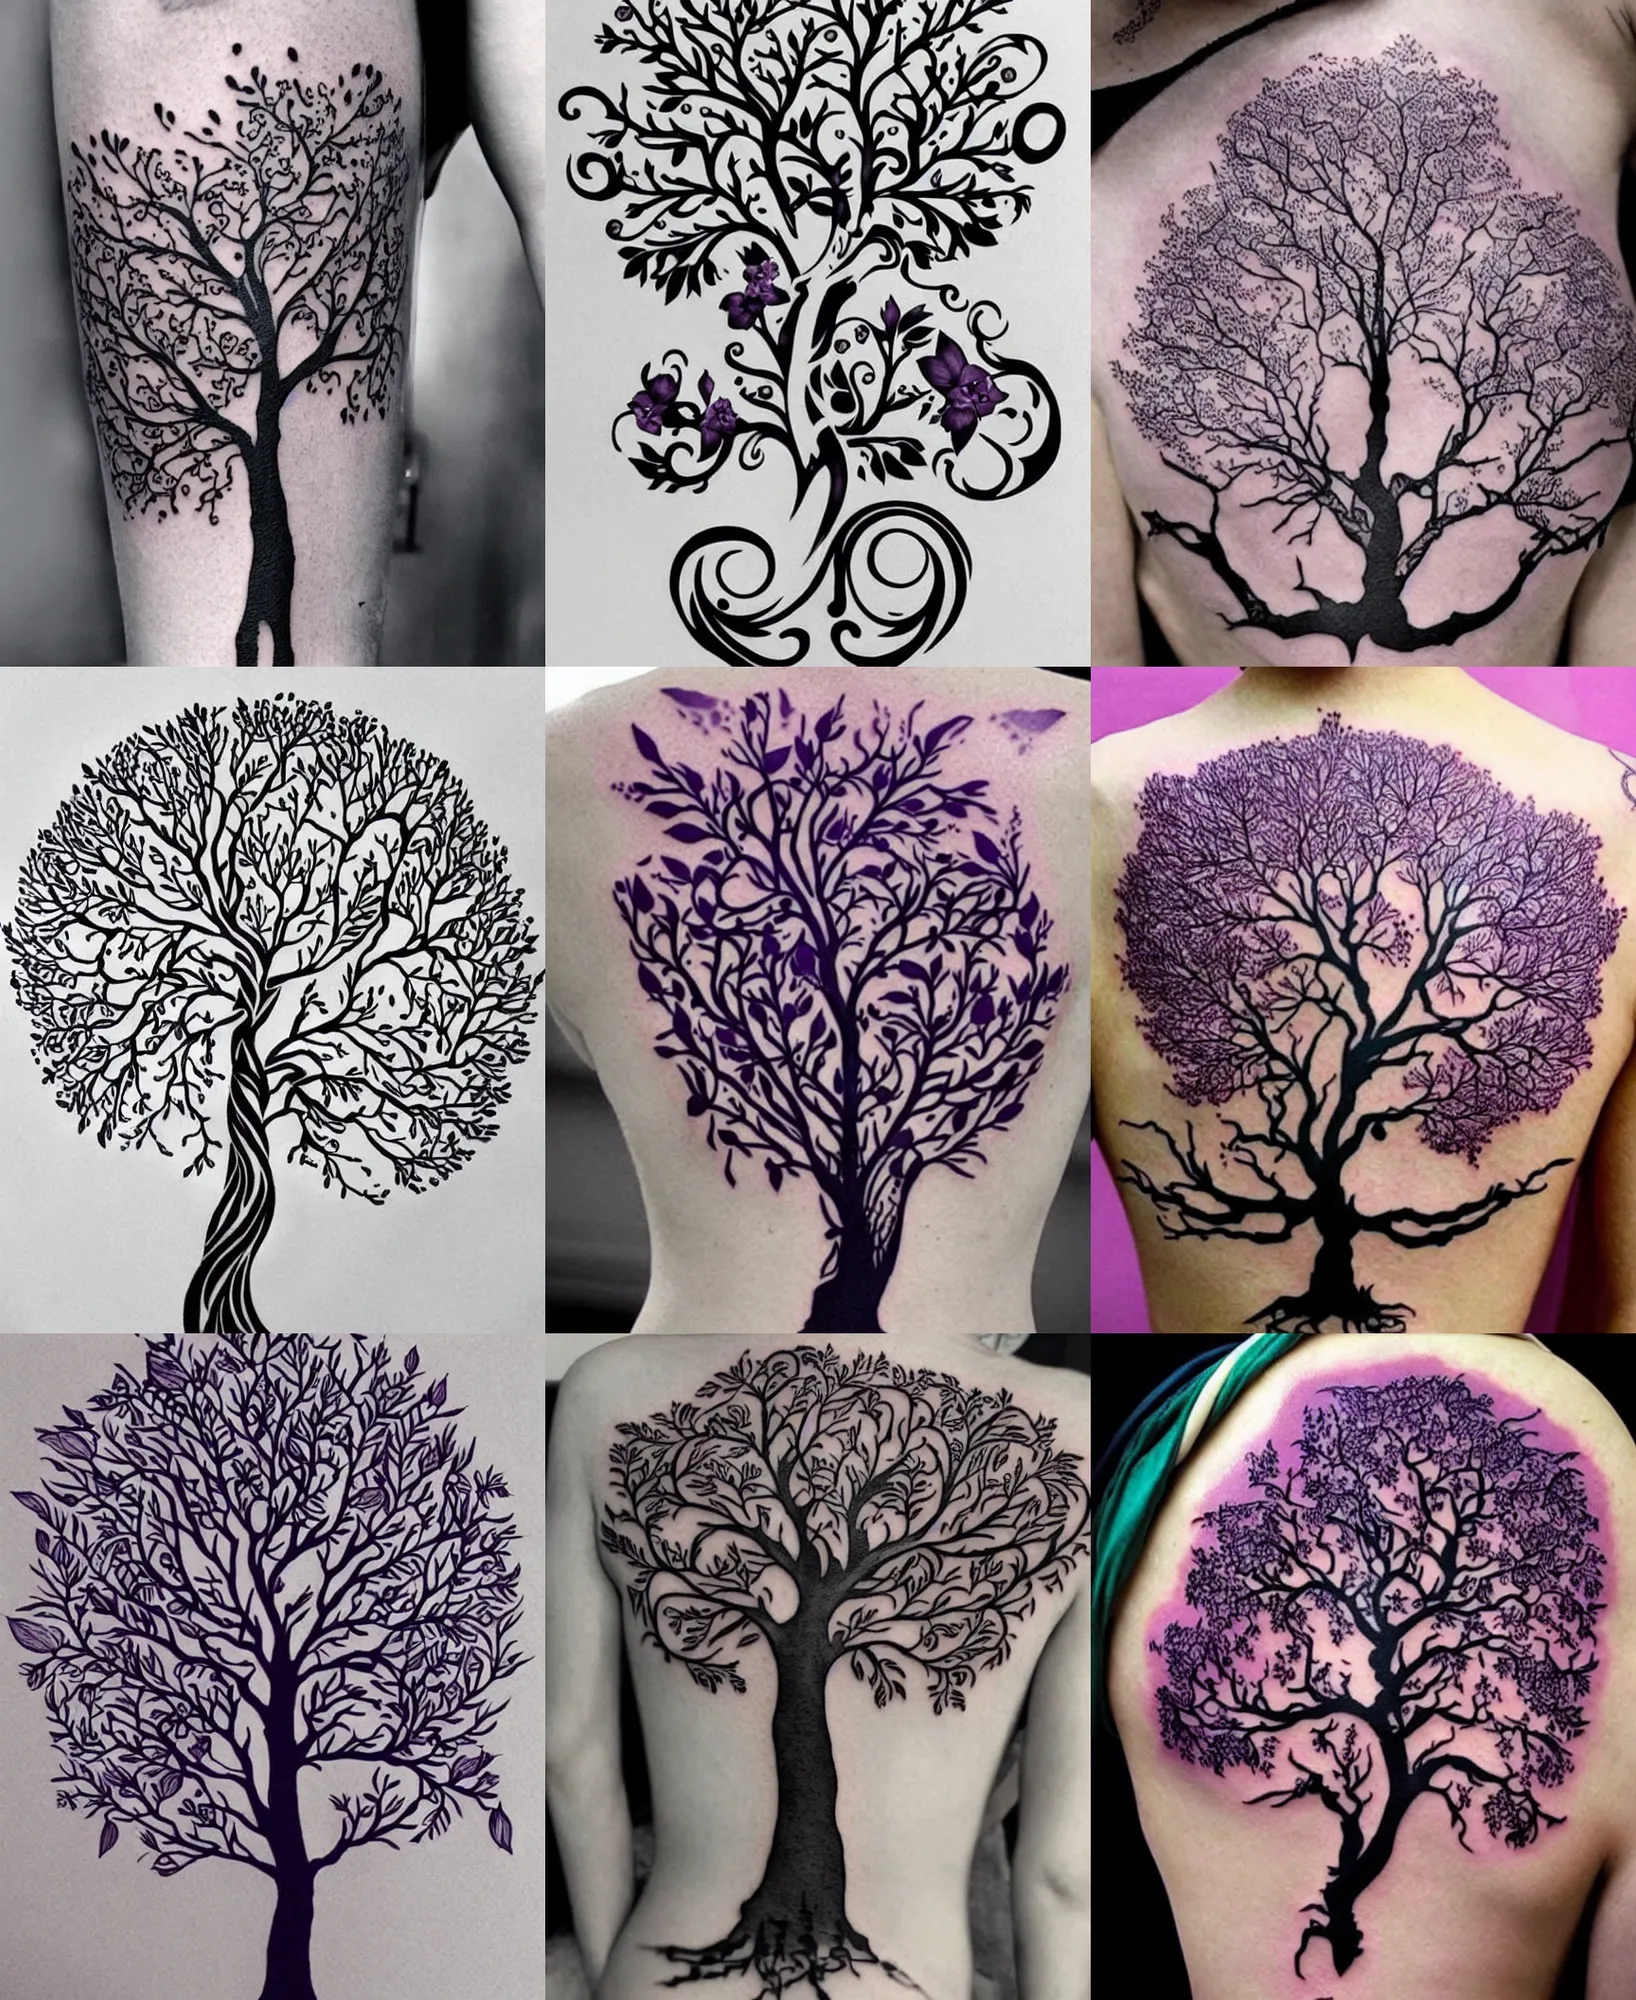 Initial pencil sketch of Tree of Life Tattoo by DowrickDesign on DeviantArt